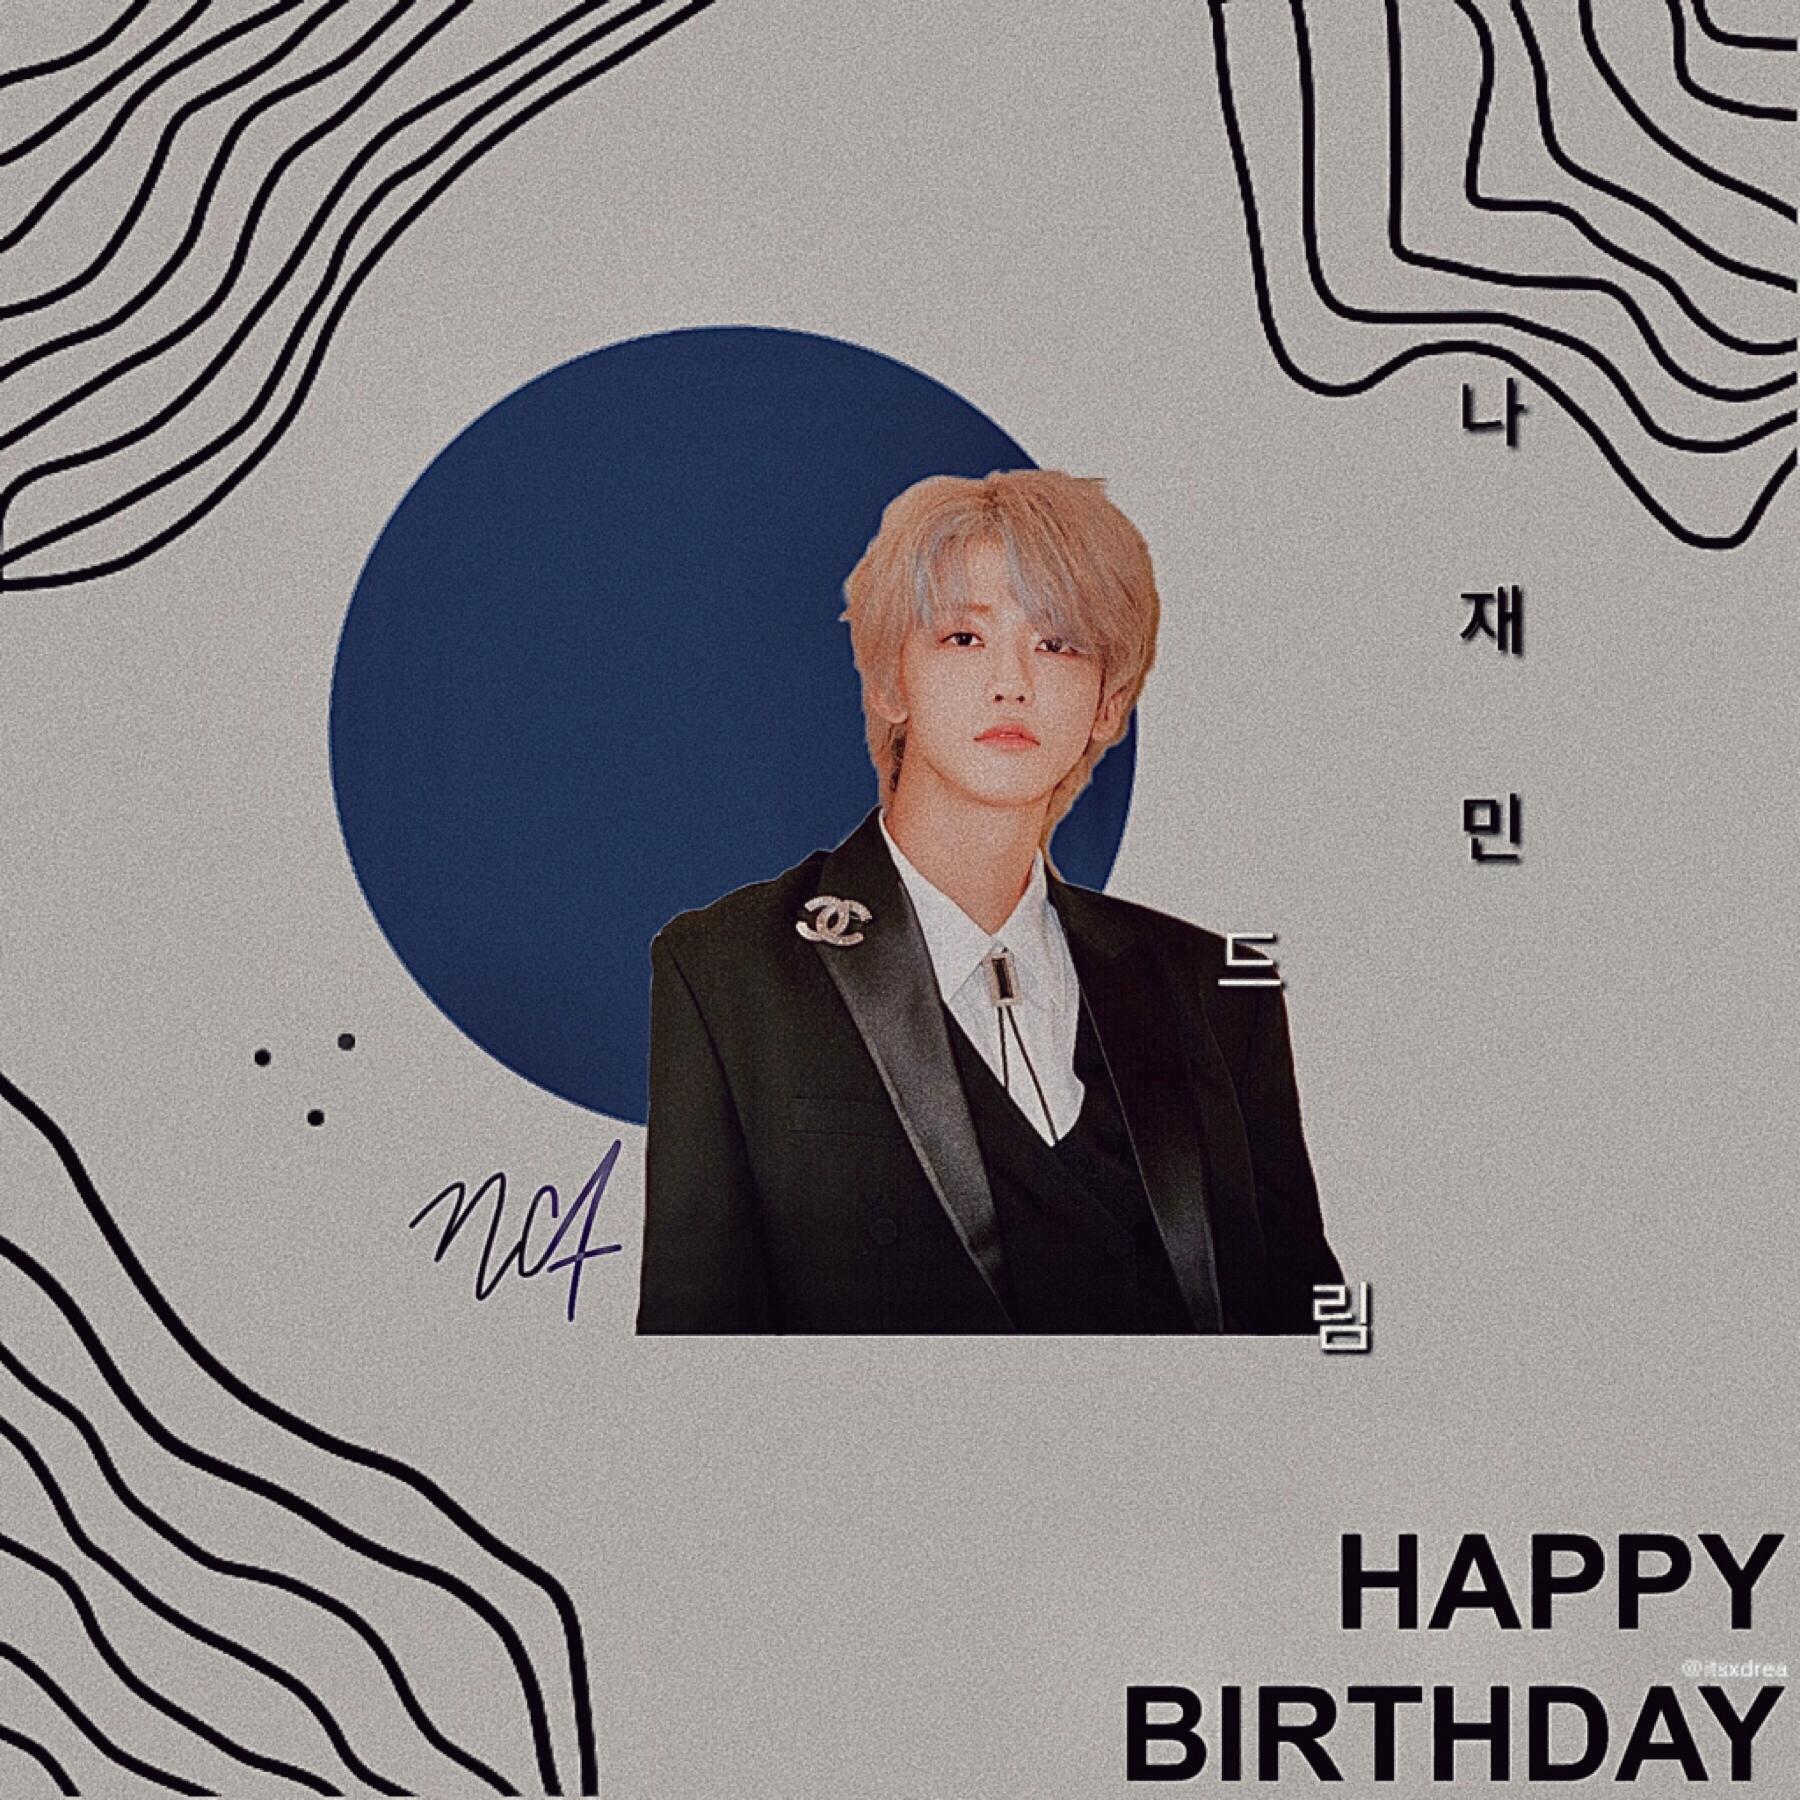 🌫
• na jaemin // nct •
| inspo: @leegraphics on whi |
HAPPY BIRTHDAYYY BB💚 WE’LL NEVER TAKE YOUR LOVE FOR NCTZENS FOR GRANTED!! I CANT BELIEVE YOURE 20 🤧i’m not very happy w the way this turned out 😖 but it’s his bday so i had to do smth 